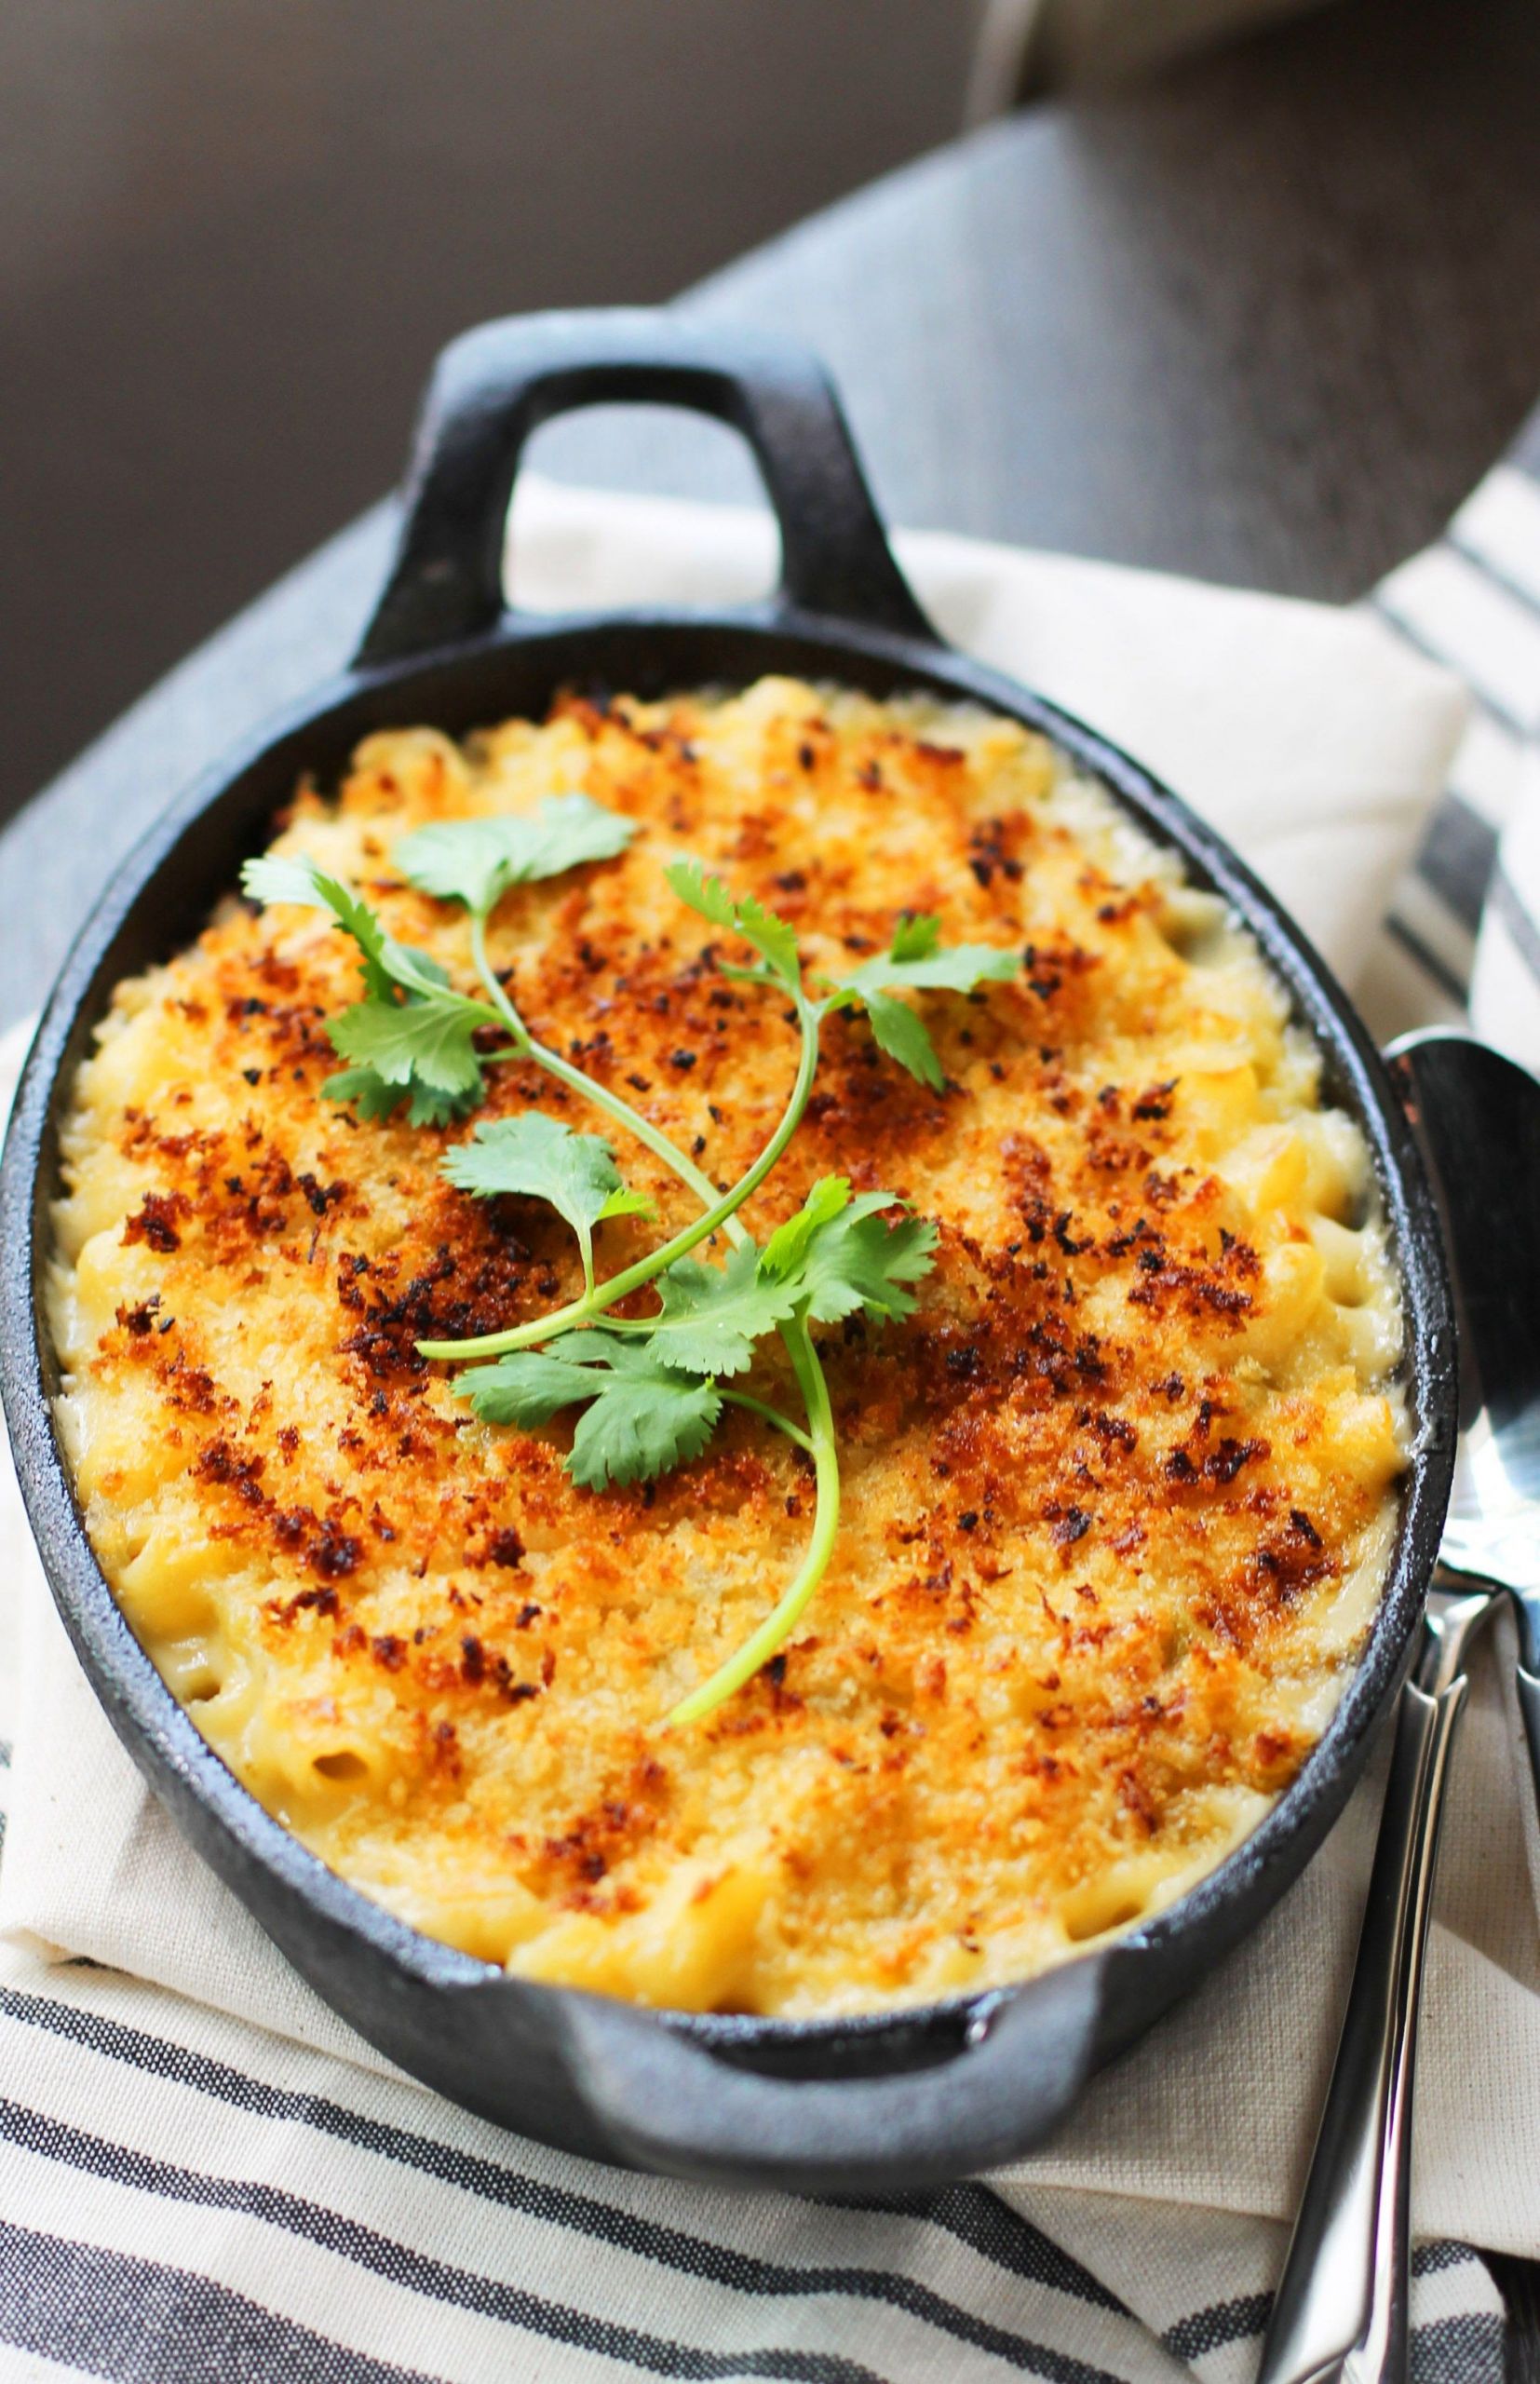 Baked Macaroni And Cheese With Bacon Paula Deen
 Green Chile Mac and Cheese Recipe